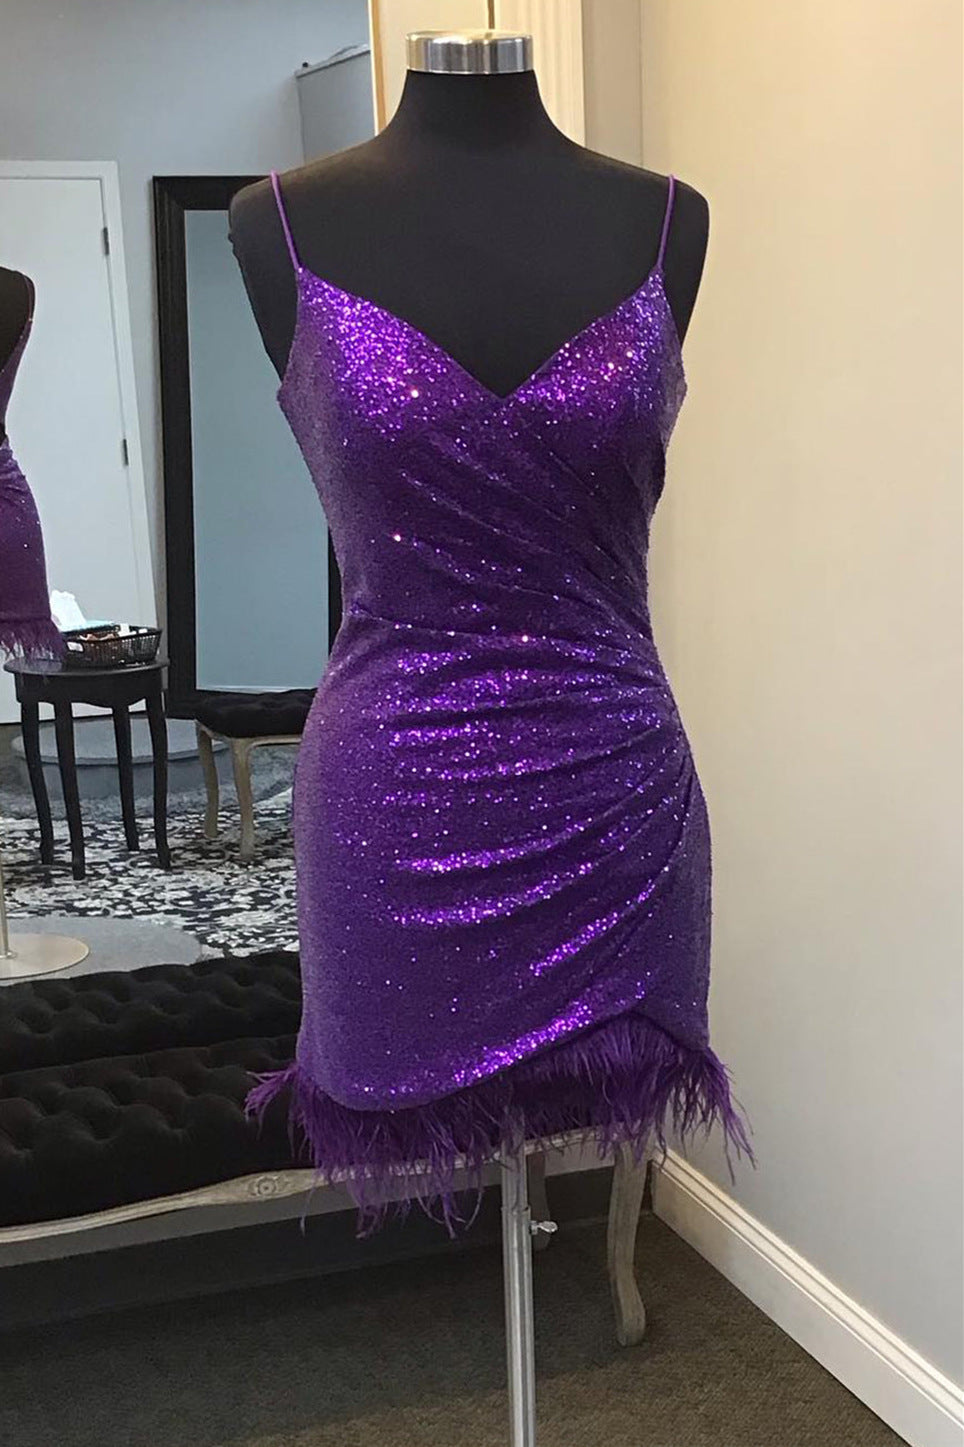 V-Neck Purple Sequins Homecoming Dress with Feather Hem